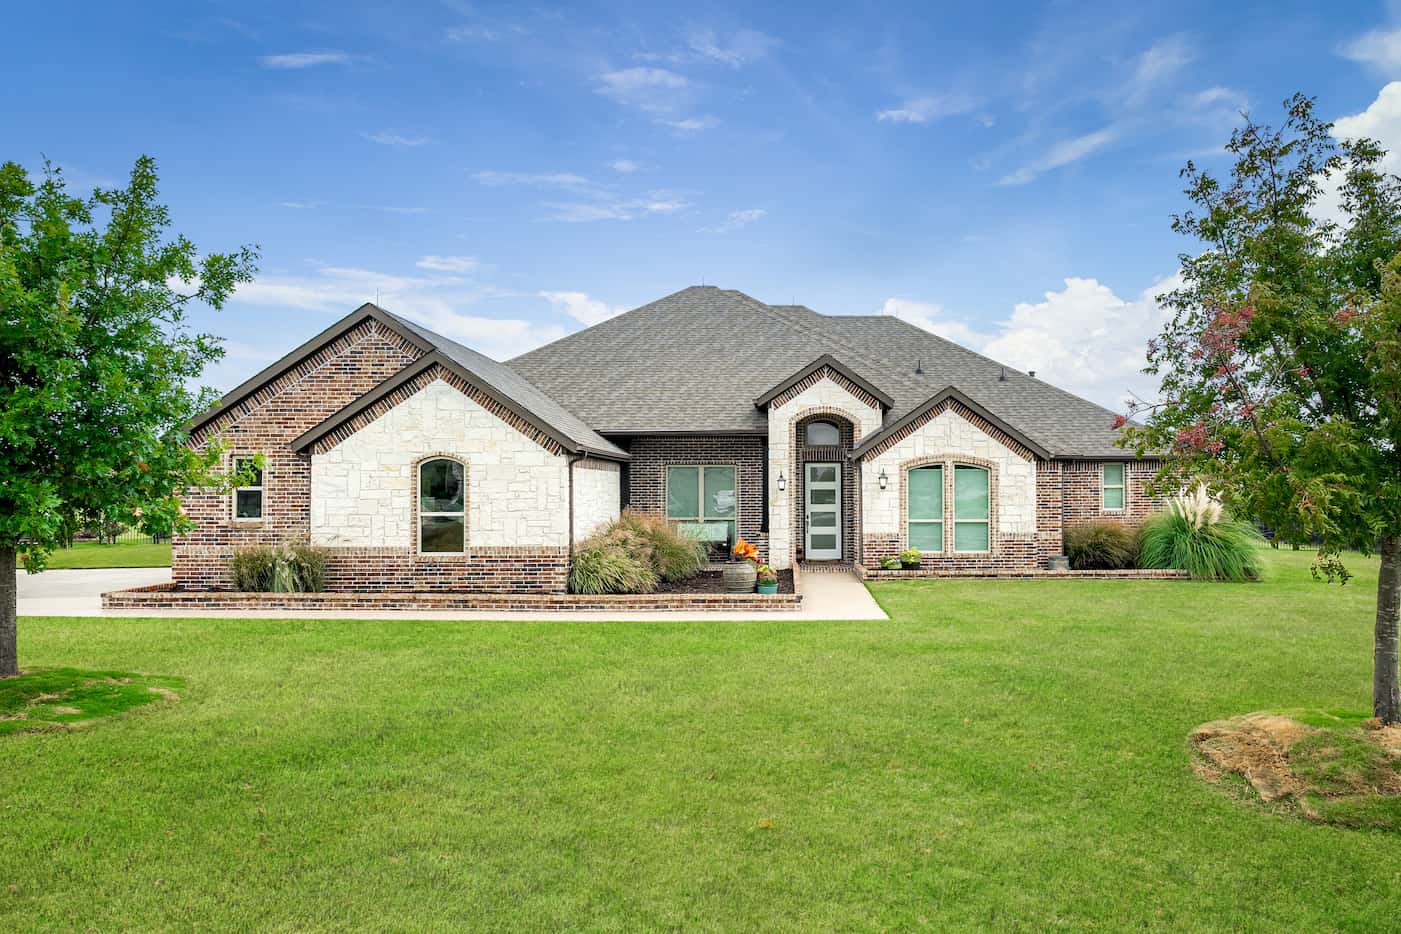 At DC Ranch in Celina, homes are built on lots that are a minimum of 1 acre.